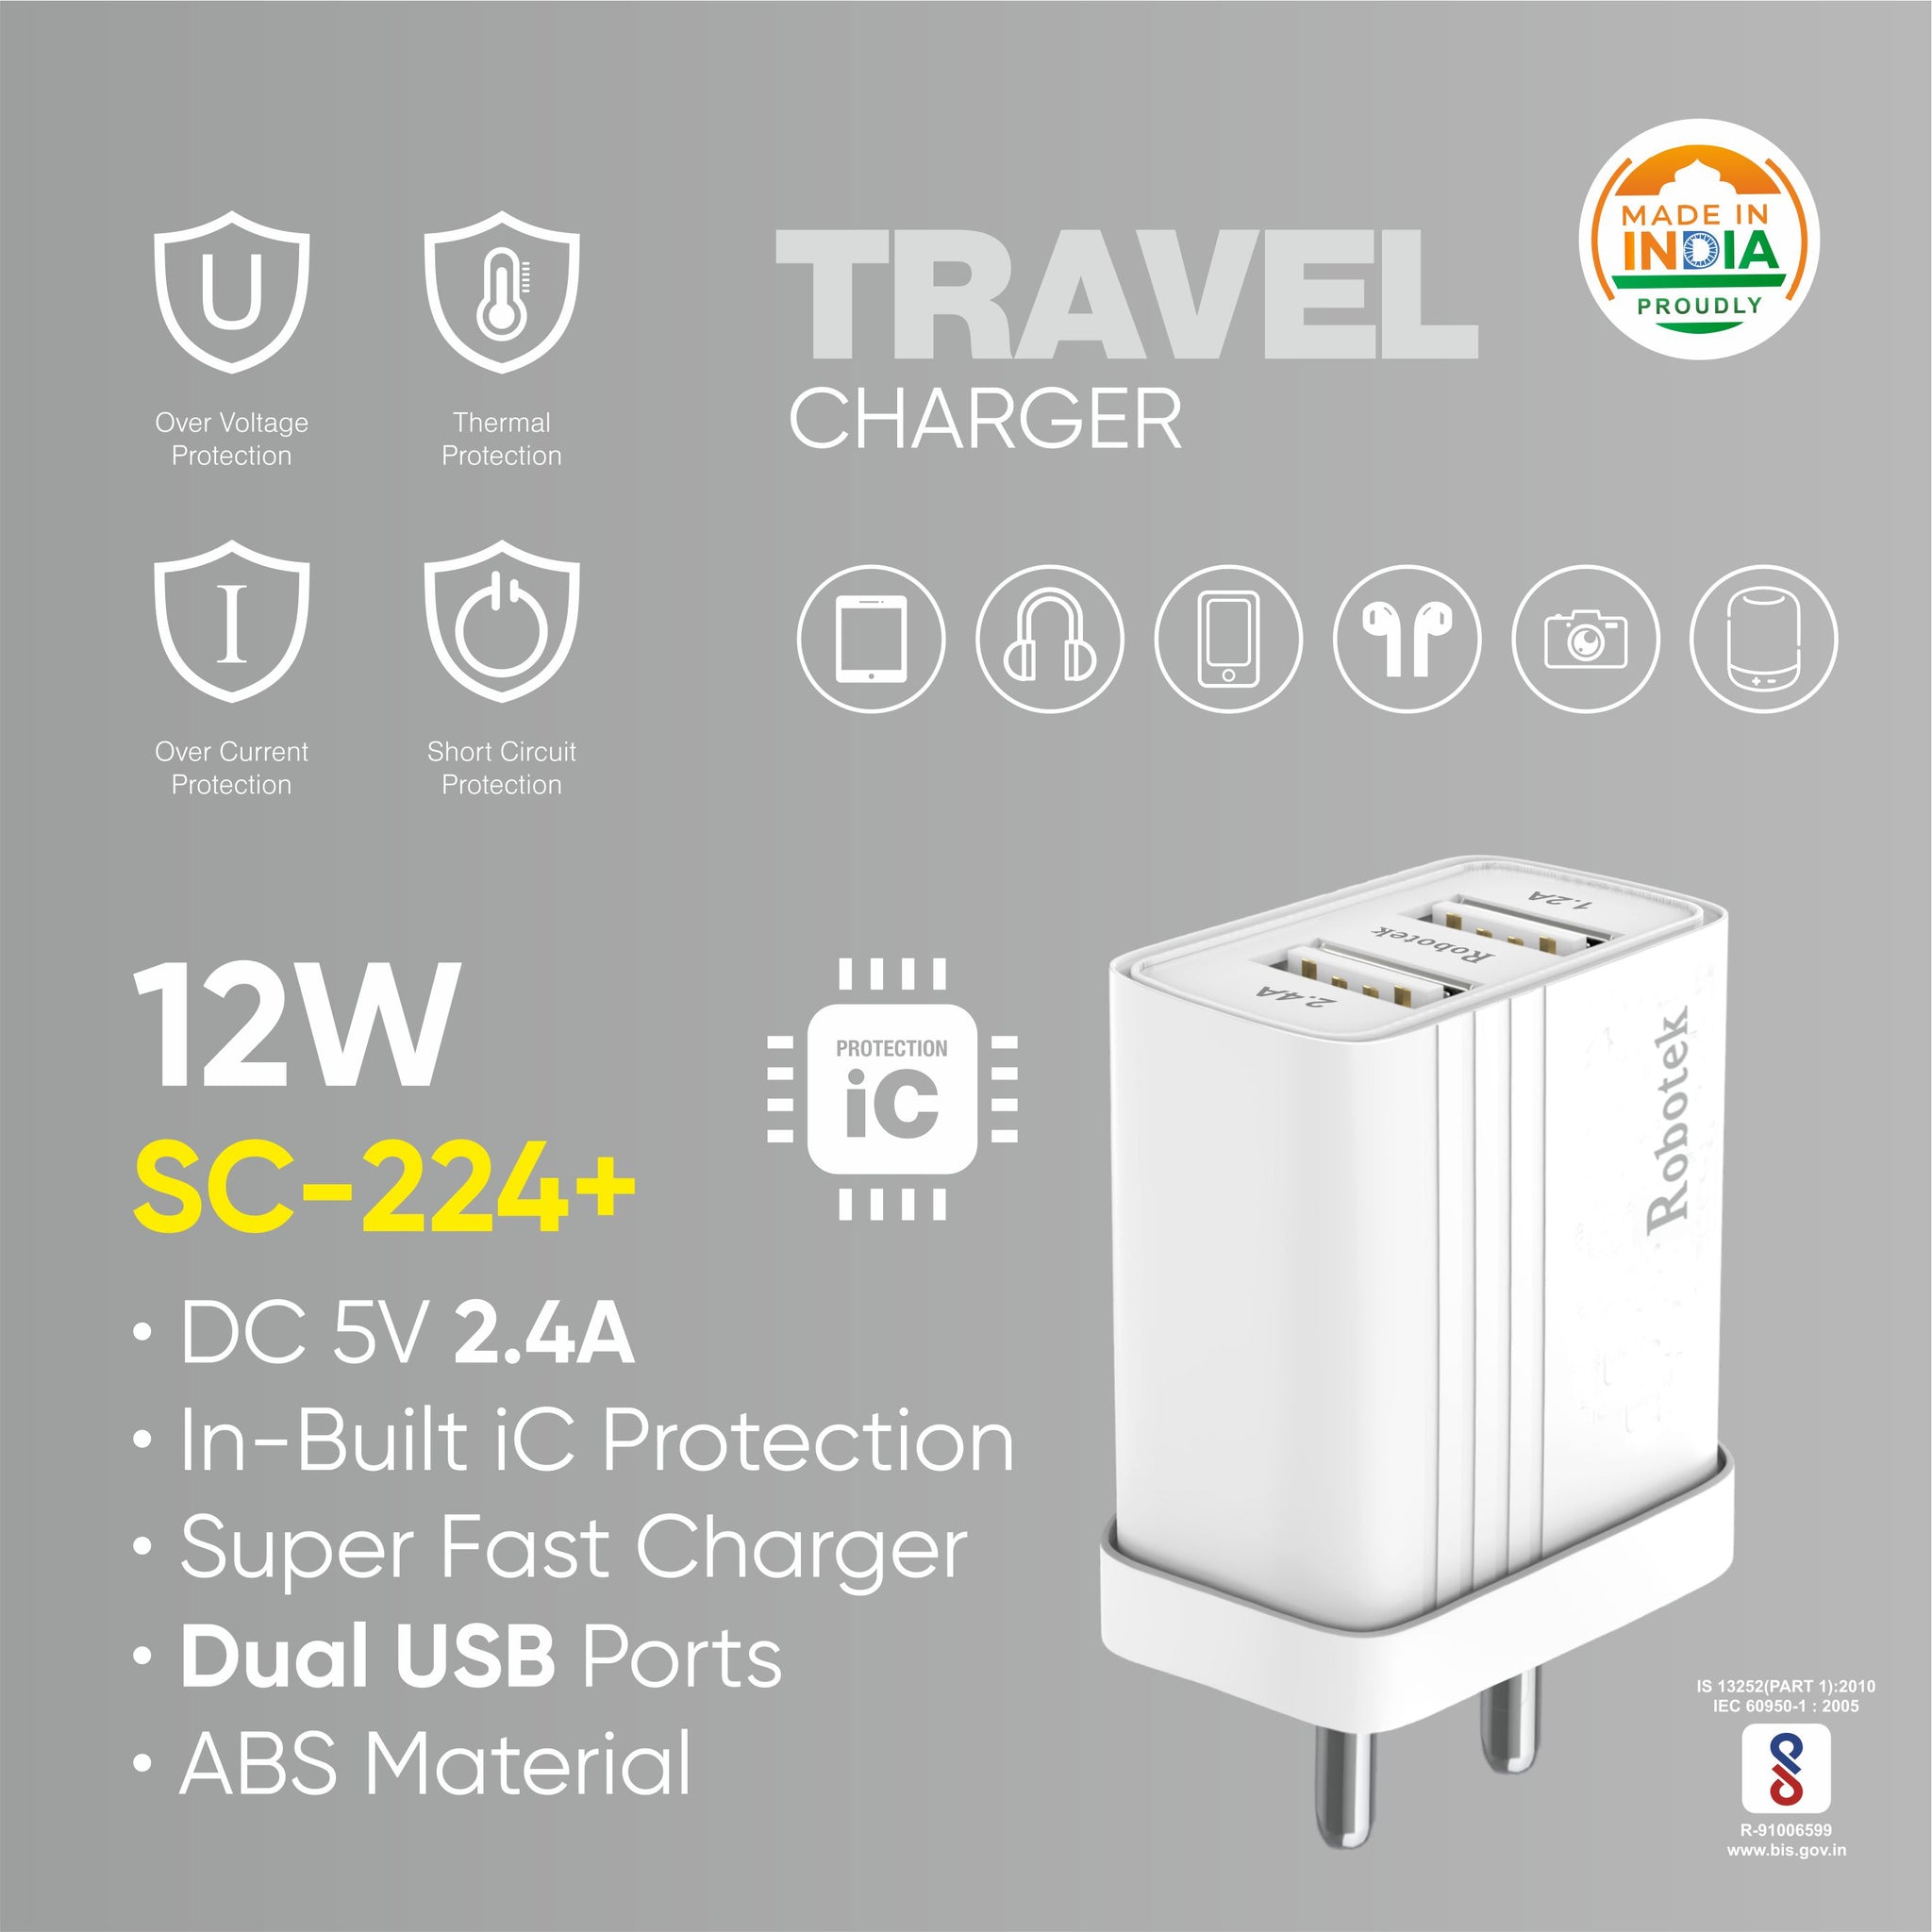 SC-224 Plus 12W 2.4A Mobile Wall Charger Adapter with USB to Type C/Micro USB v8/iPhone, Dual USB Port Travel Fast Charging Power Adapter for Mobile Phones & Tablets (White, Cable Included)